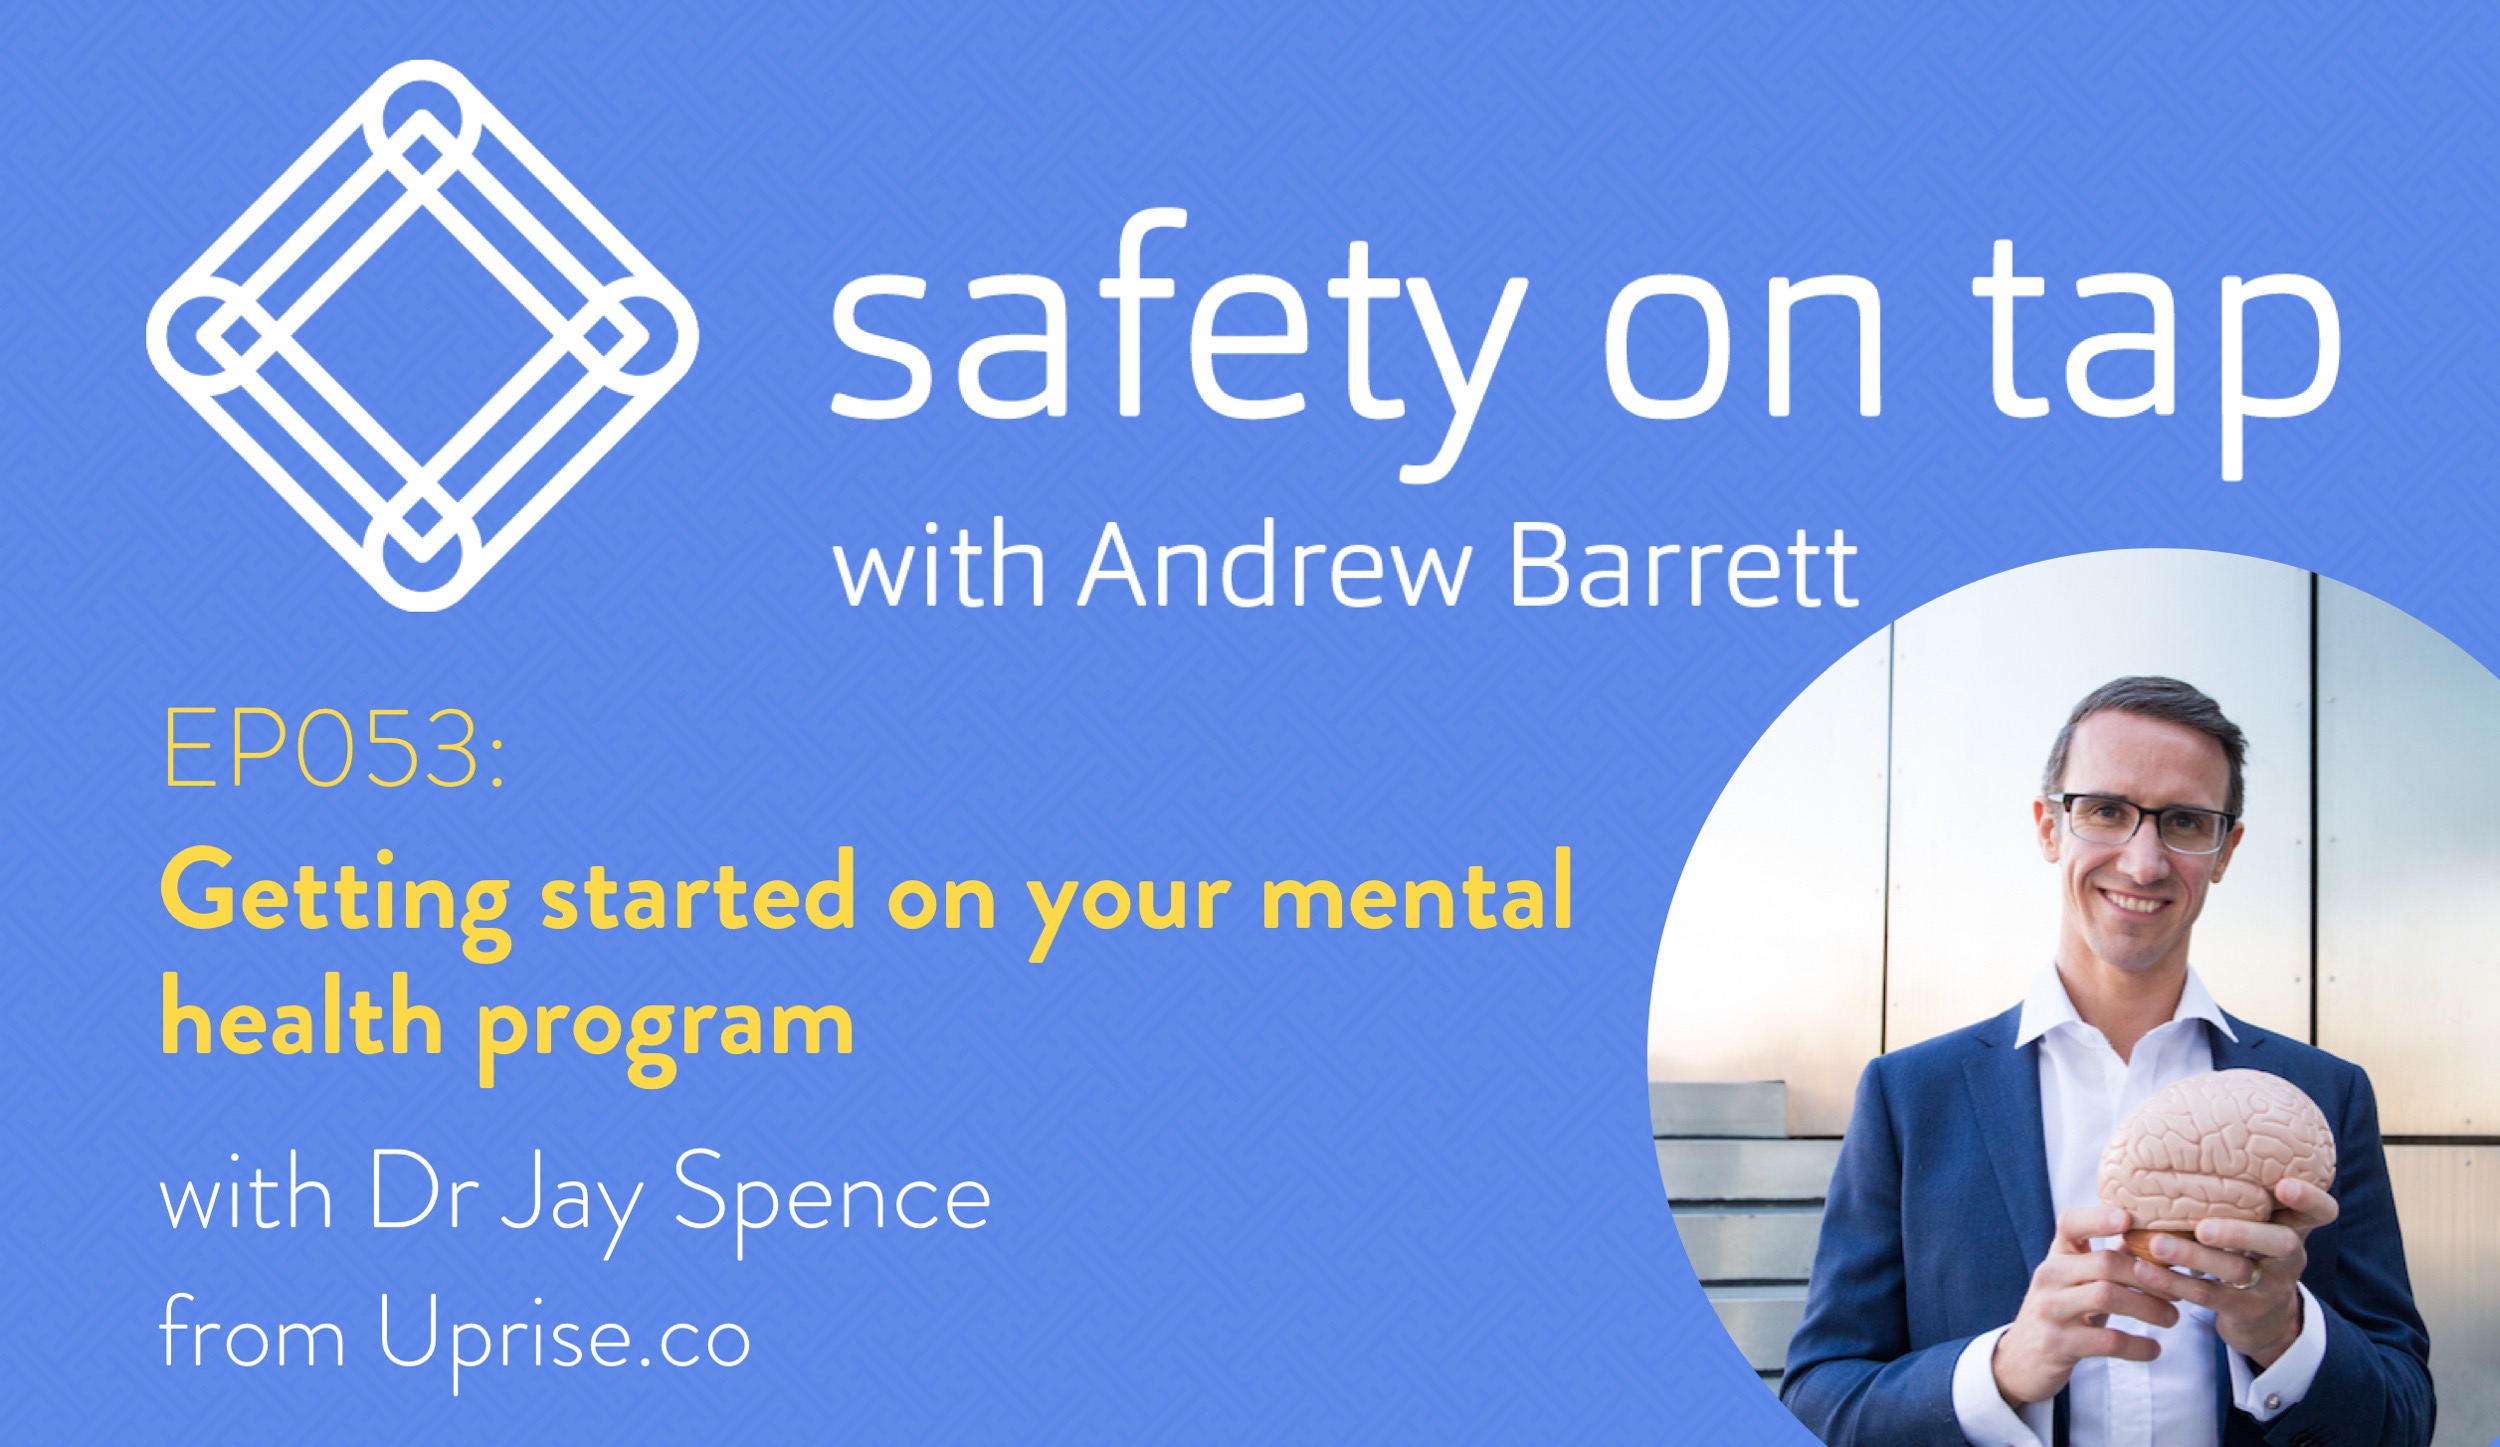 Ep053: Getting started on your mental health program, with Jay Spence